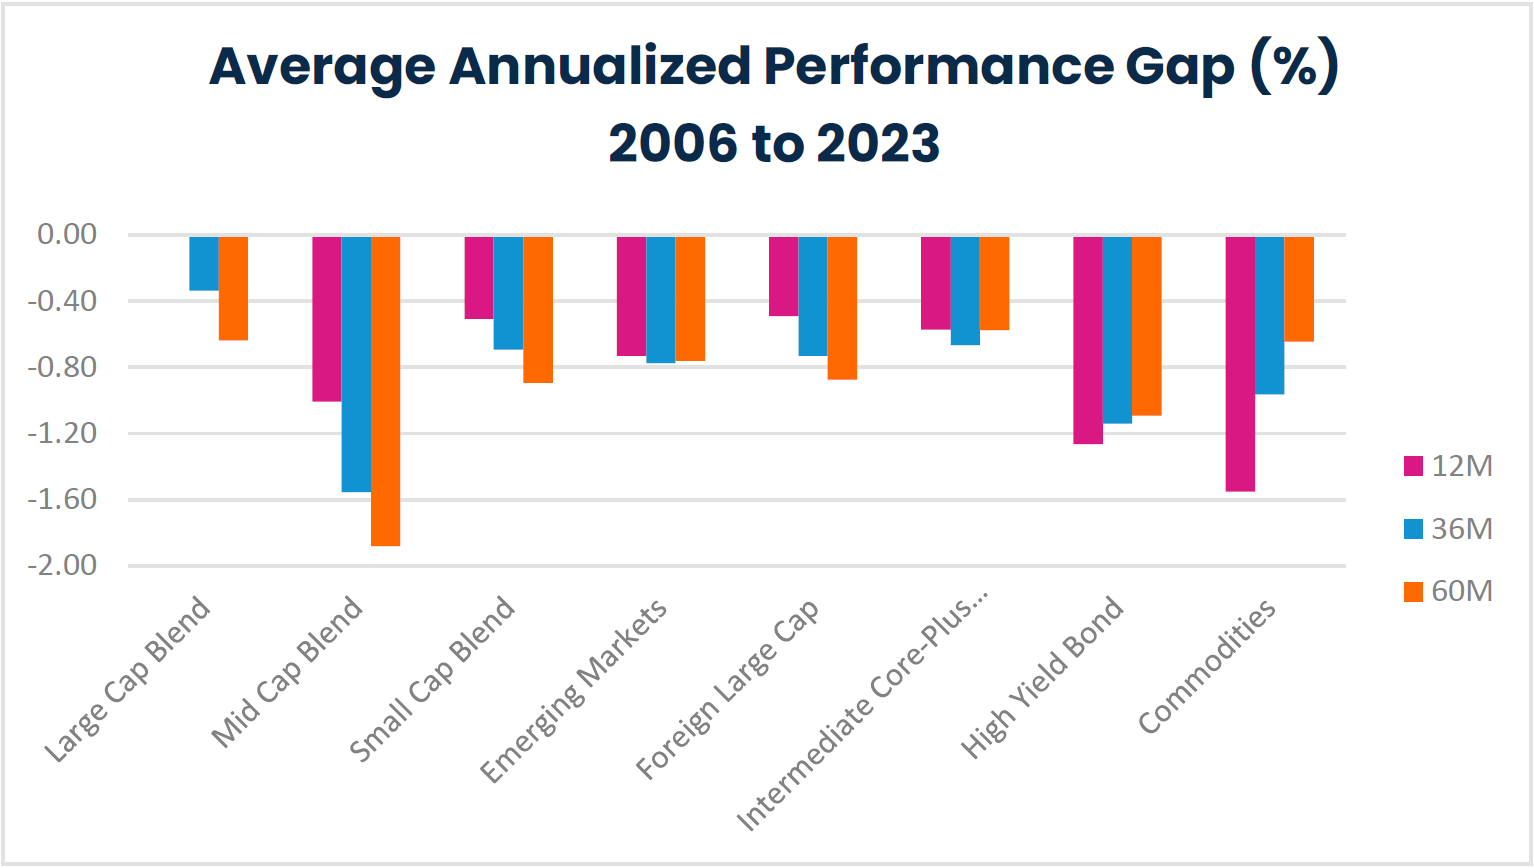 Average Annualized Performance Gap (%) 2006 to 2023